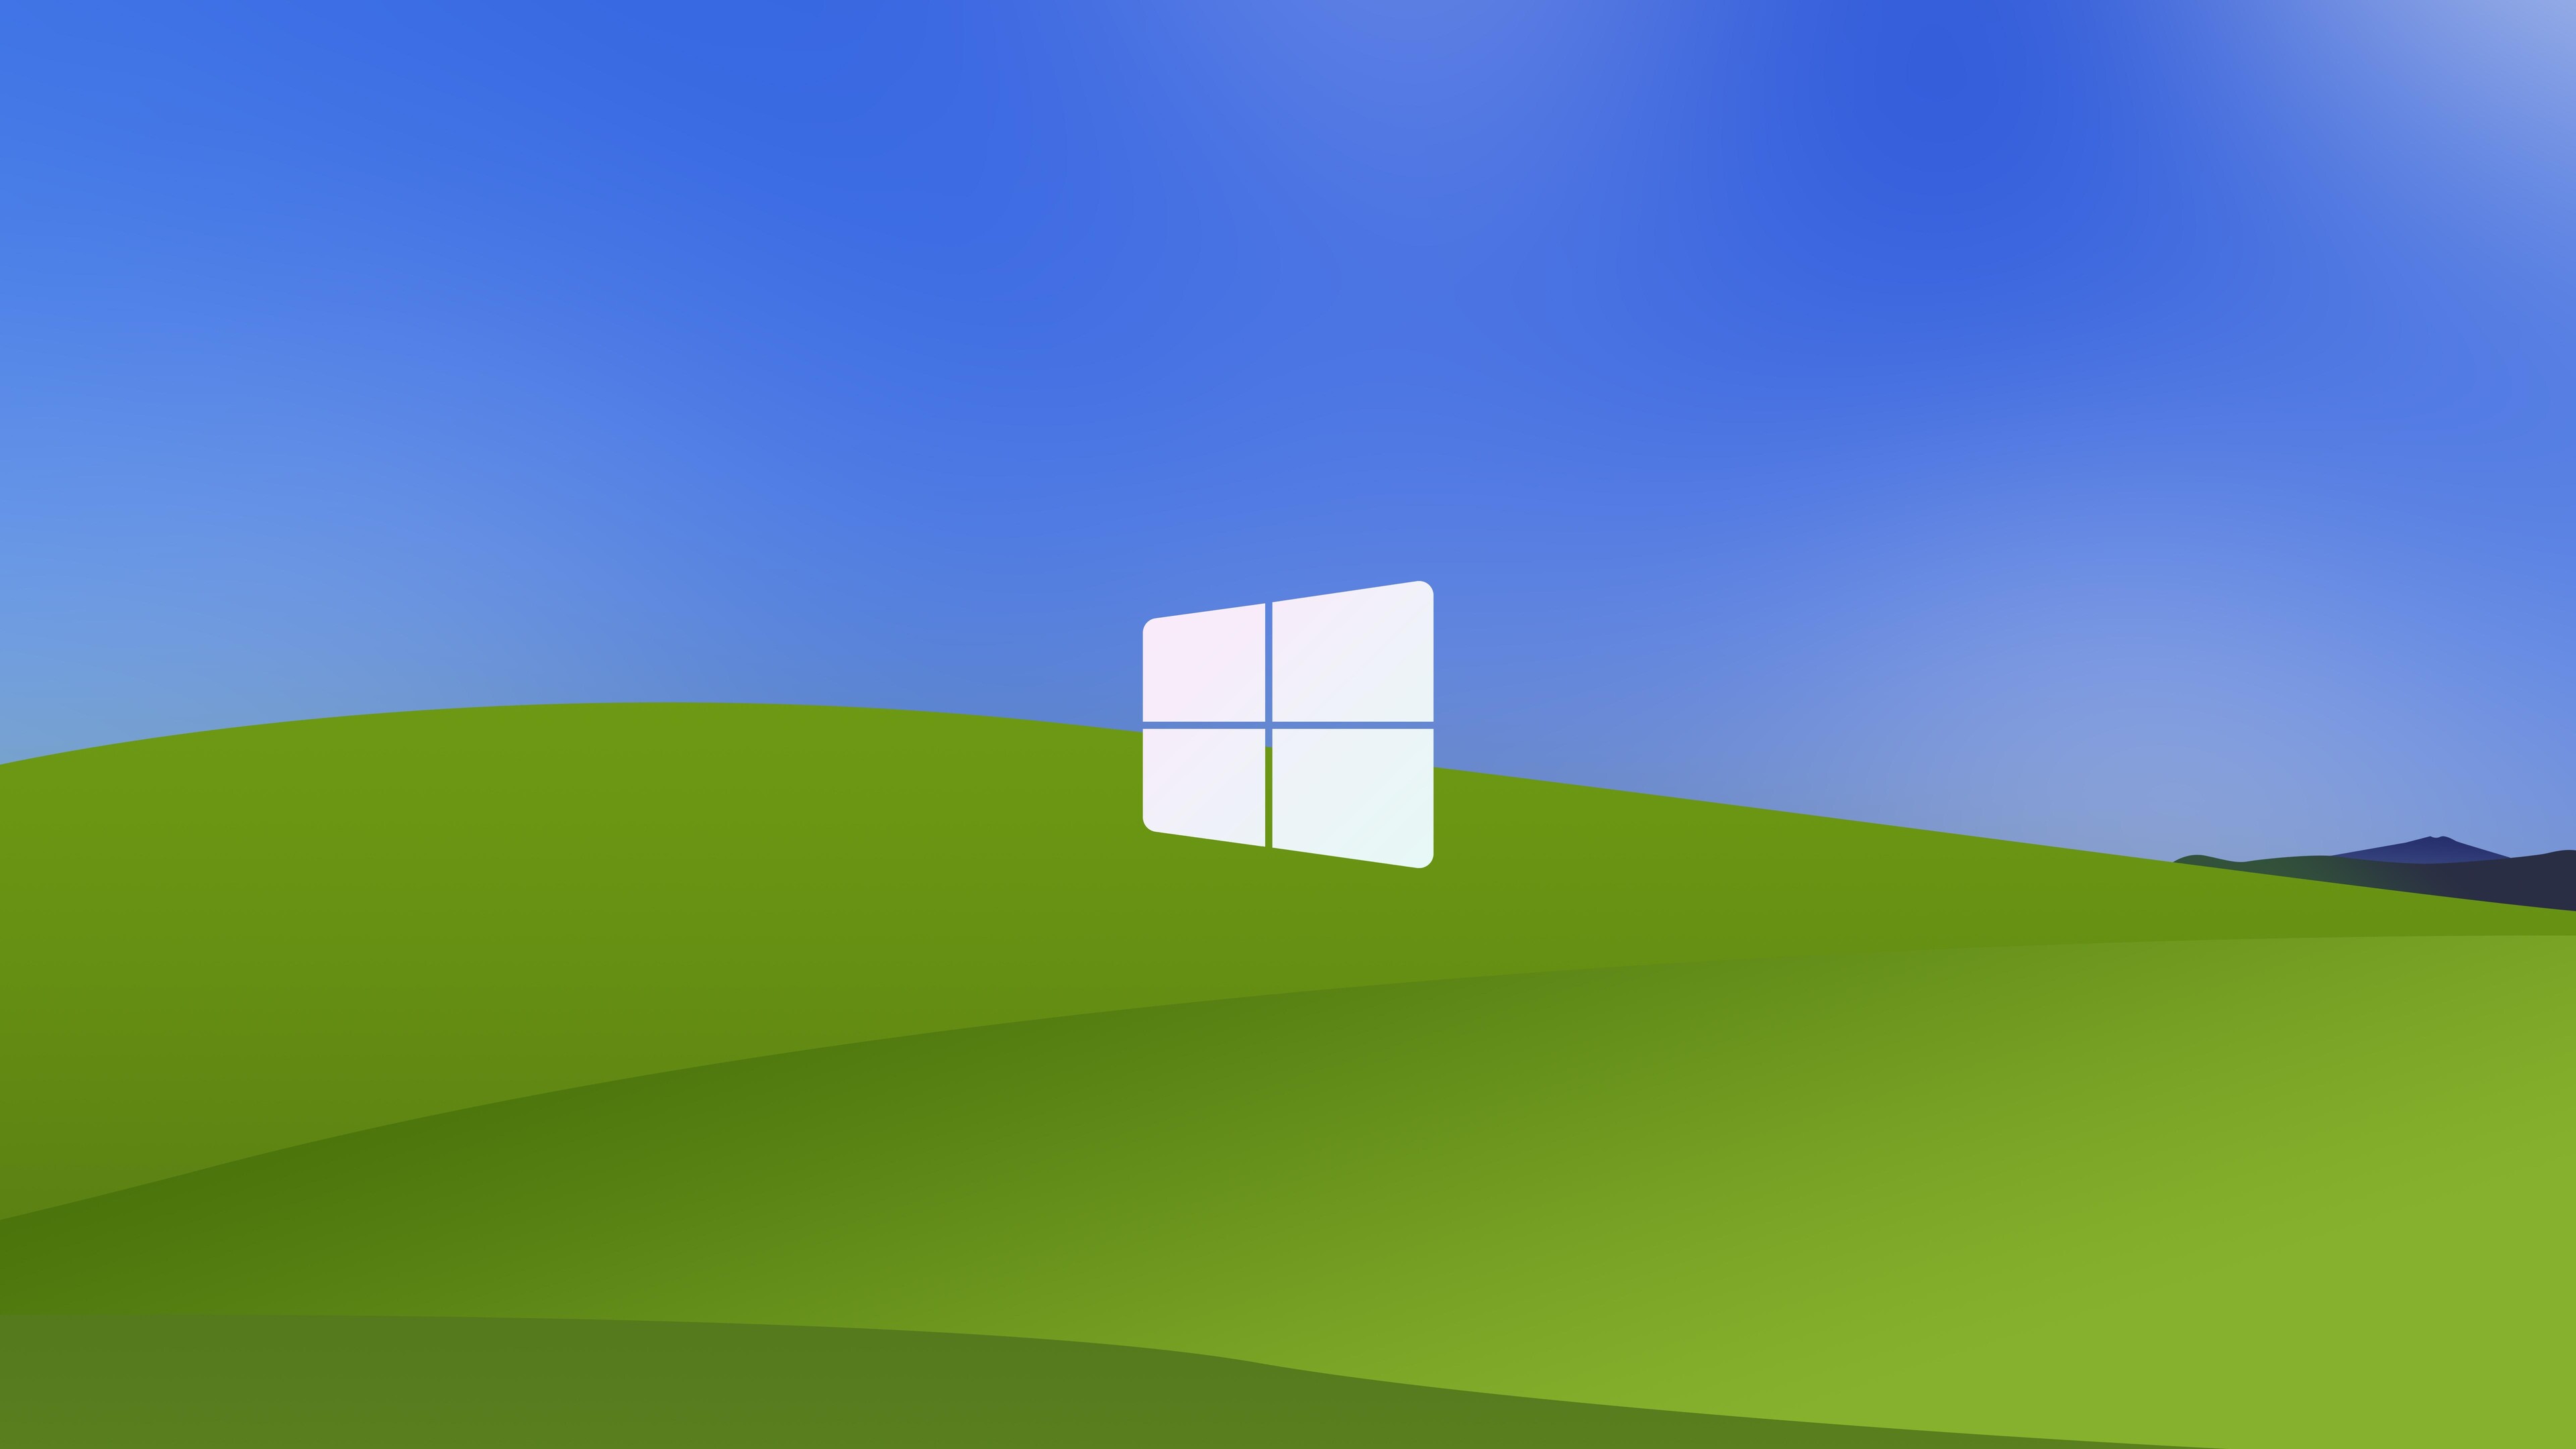 X windows xp logo minimalism k k hd k wallpapers images backgrounds photos and pictures